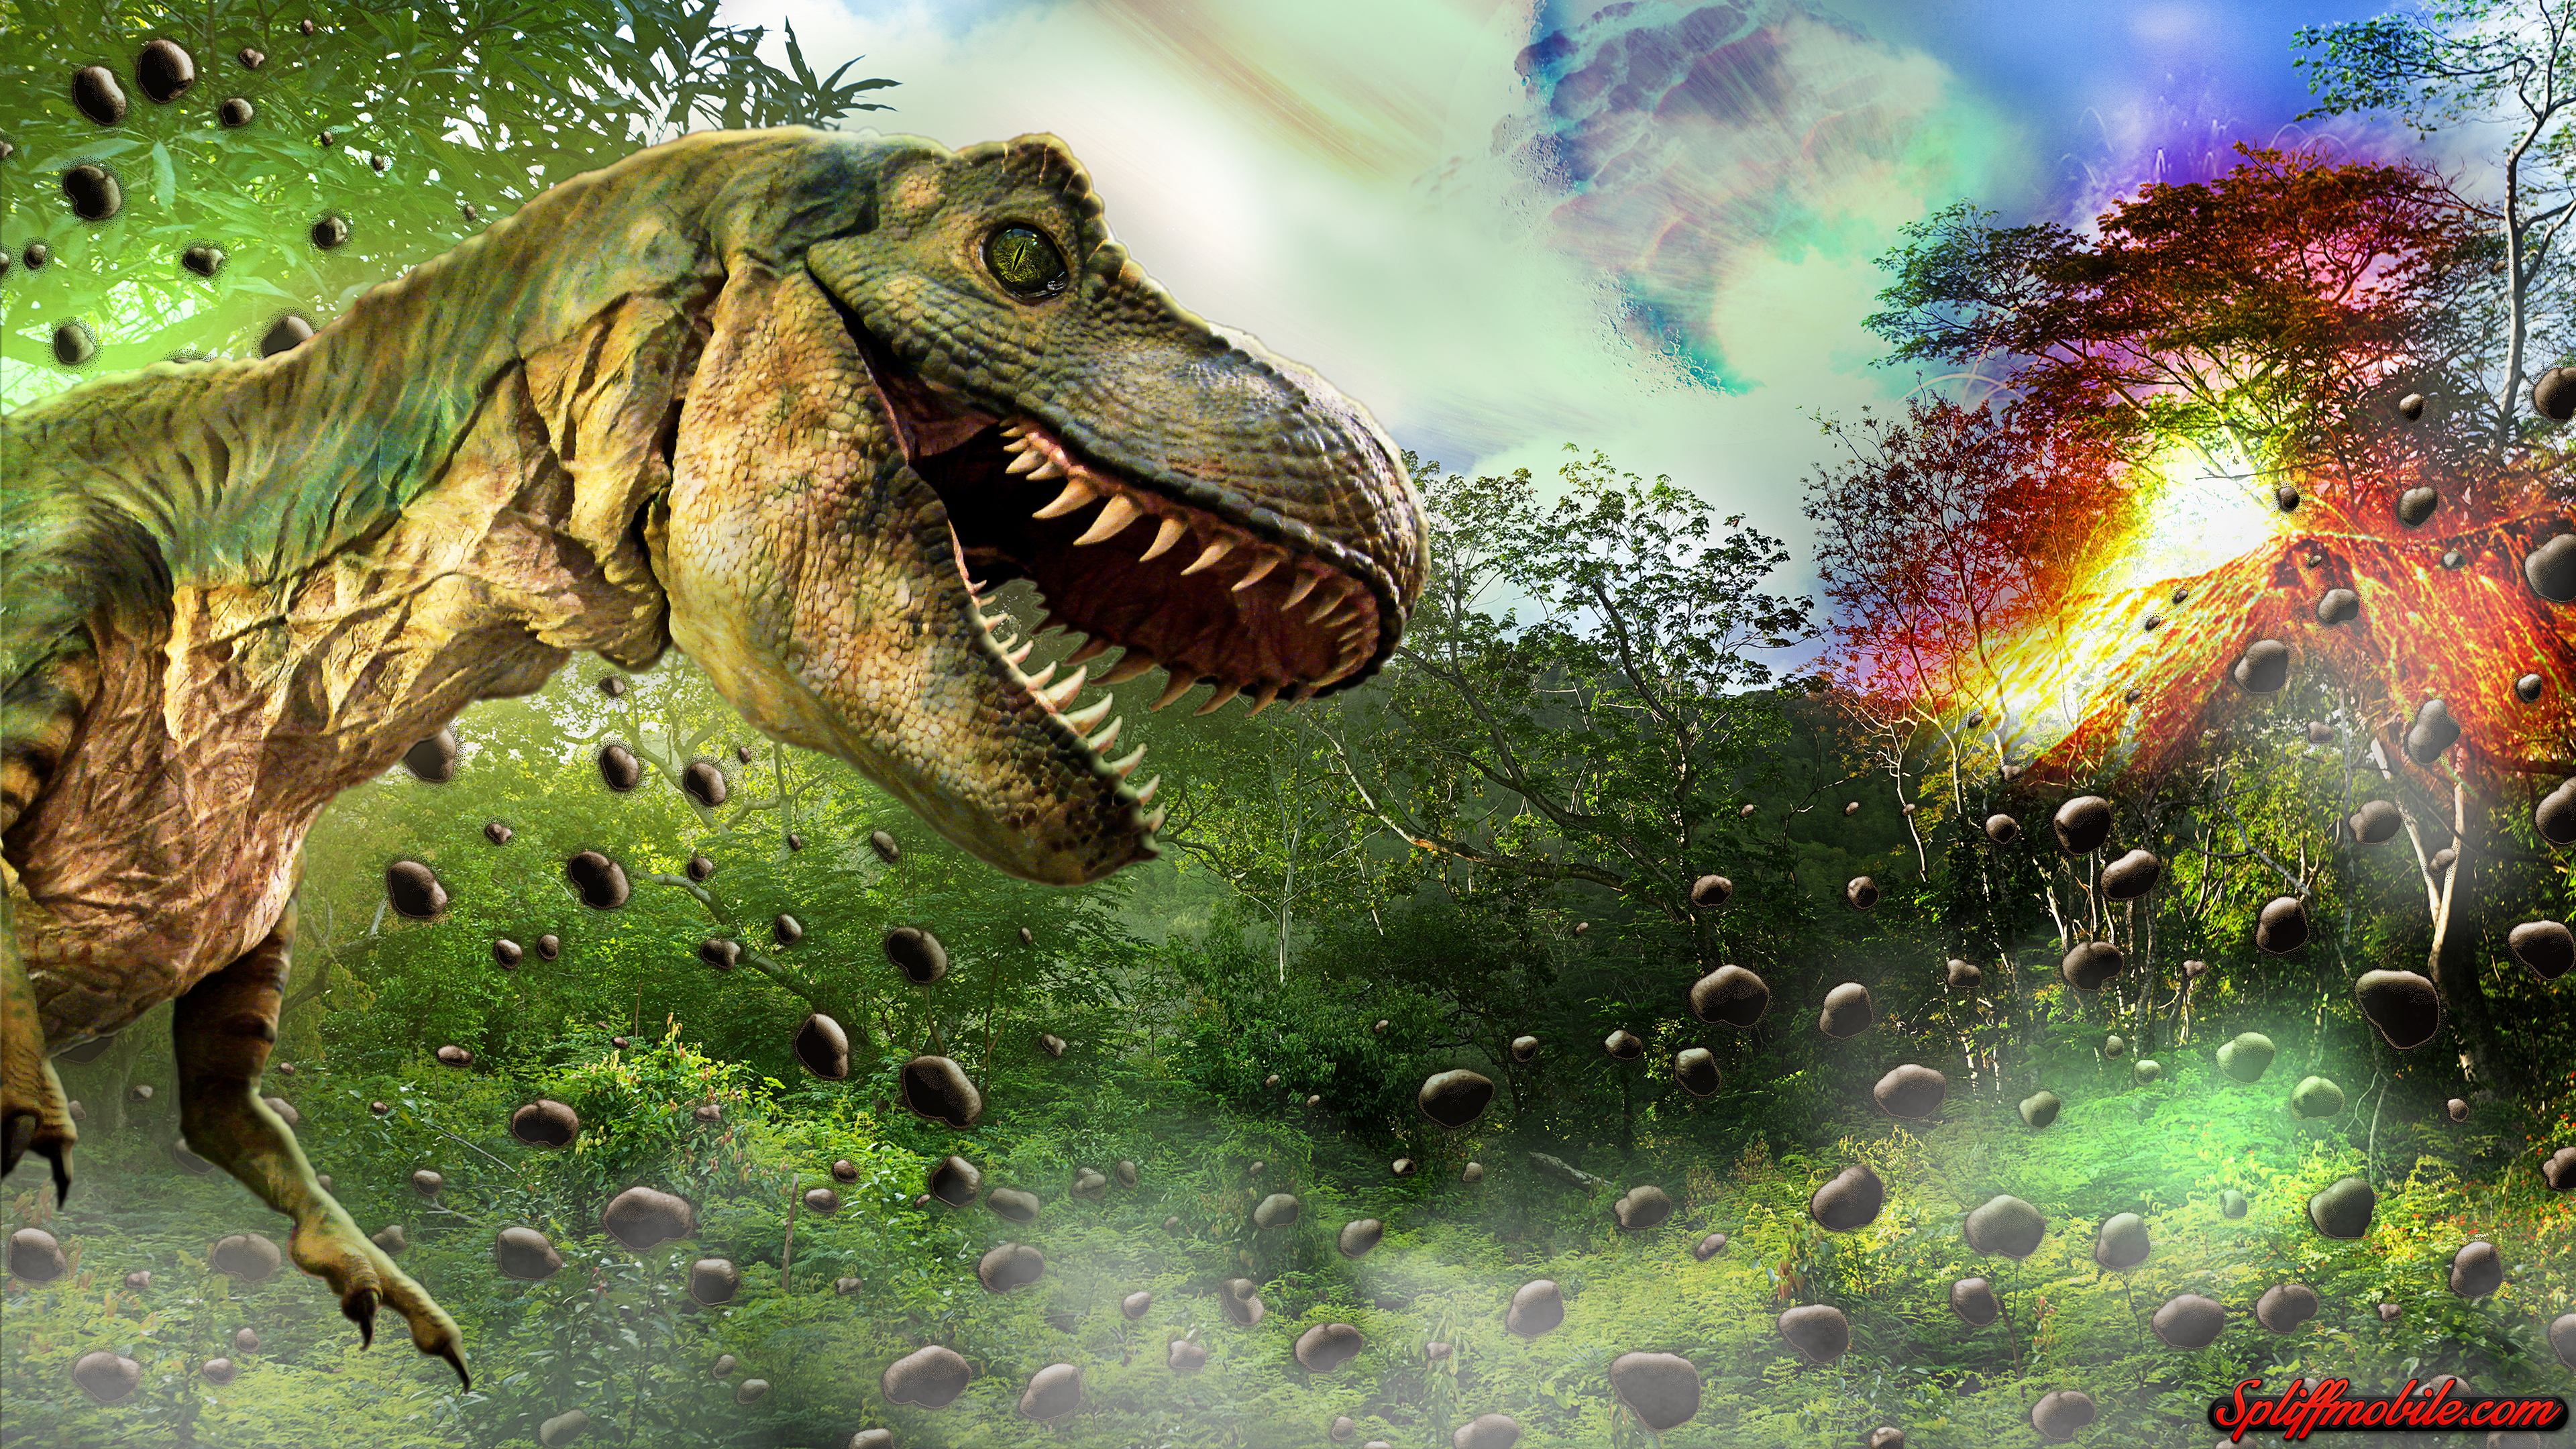 Dinosaurs backgrounds